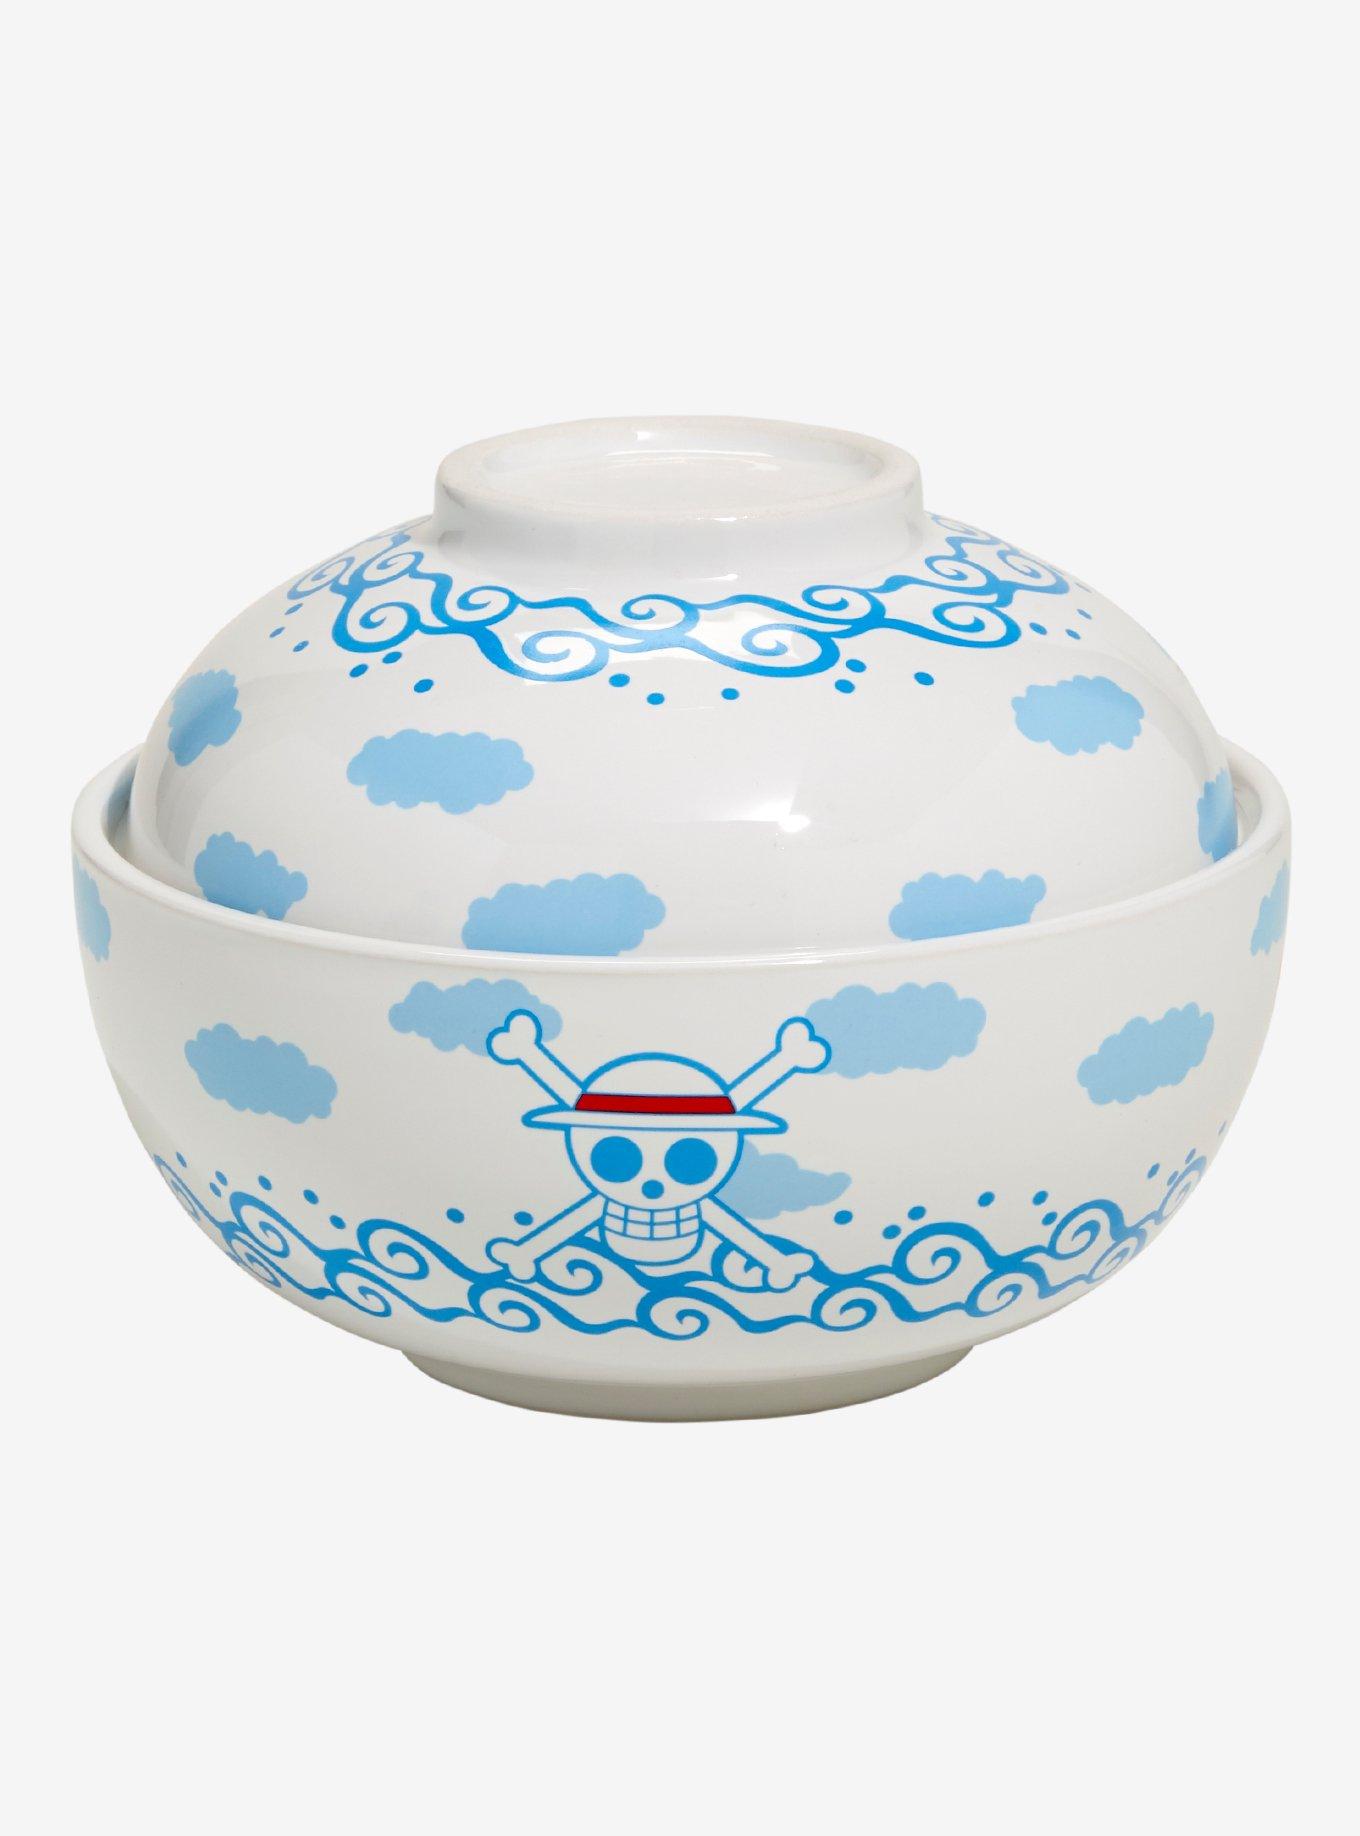 One Piece Straw Hat Crew Jolly Roger Rice Bowl Set, , hi-res